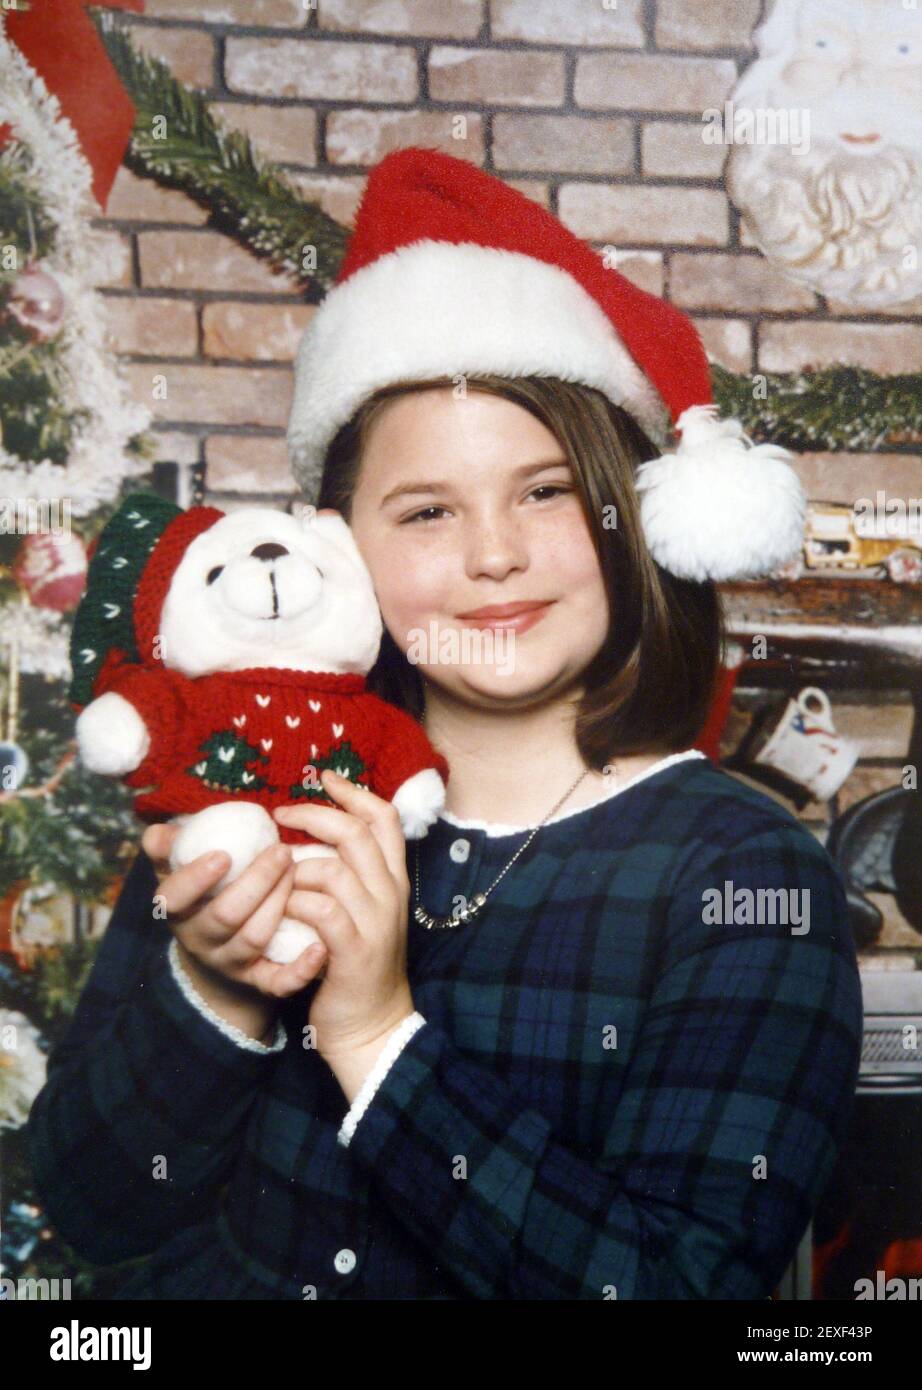 21 May 2015. Laurel, Mississippi. Collect photos of plus size model Tess Holliday (formerly known as Tess Munster, nÃ©e Ryann Hoven) in her formative years from a family album. Christmas photo of a young Tess. Photo credit; Tadlock Charley Varley *** Please Use Credit from Credit Field *** Stock Photo